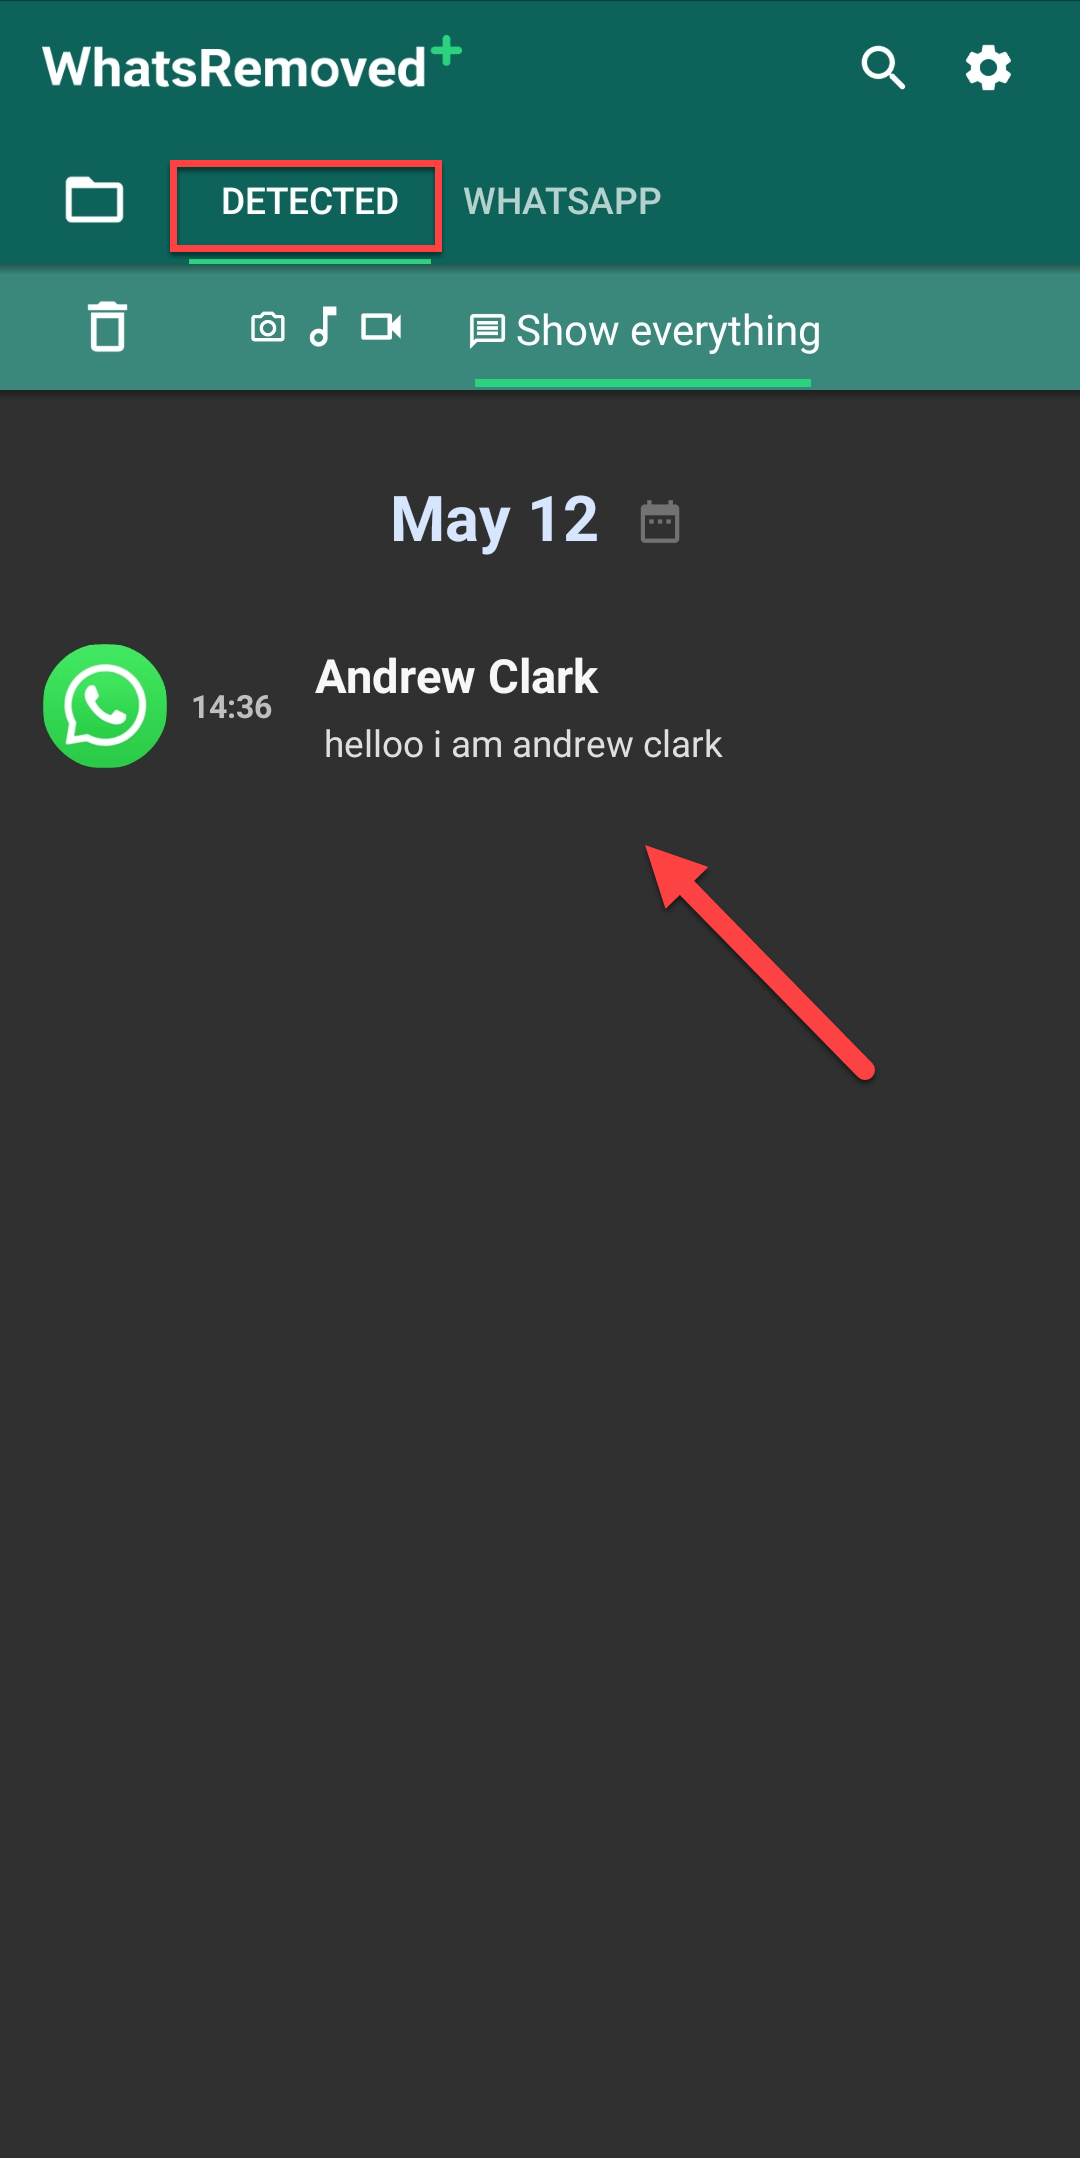 How to See Already deleted WhatsApp Messages on Android in 2021